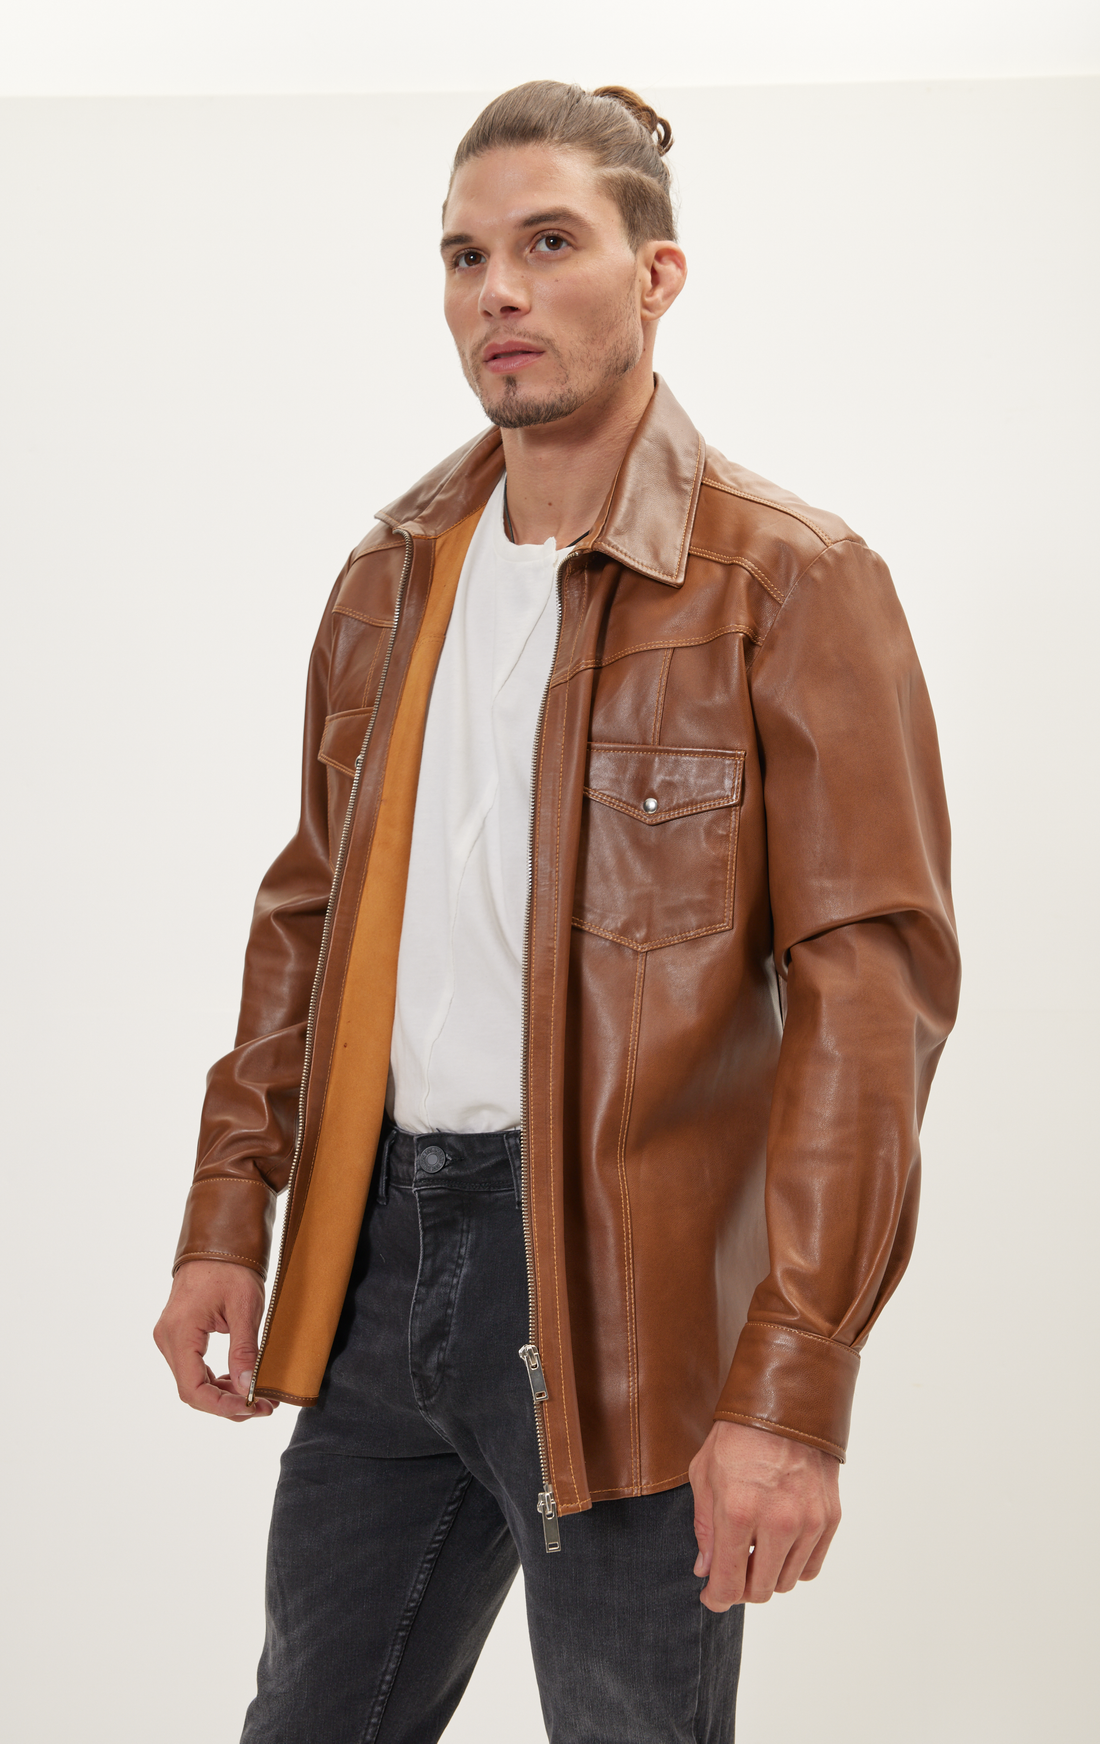 N° 4725Z GENUINE LEATHER SHIRT WITH ZIPPER CLOSURE - BROWN